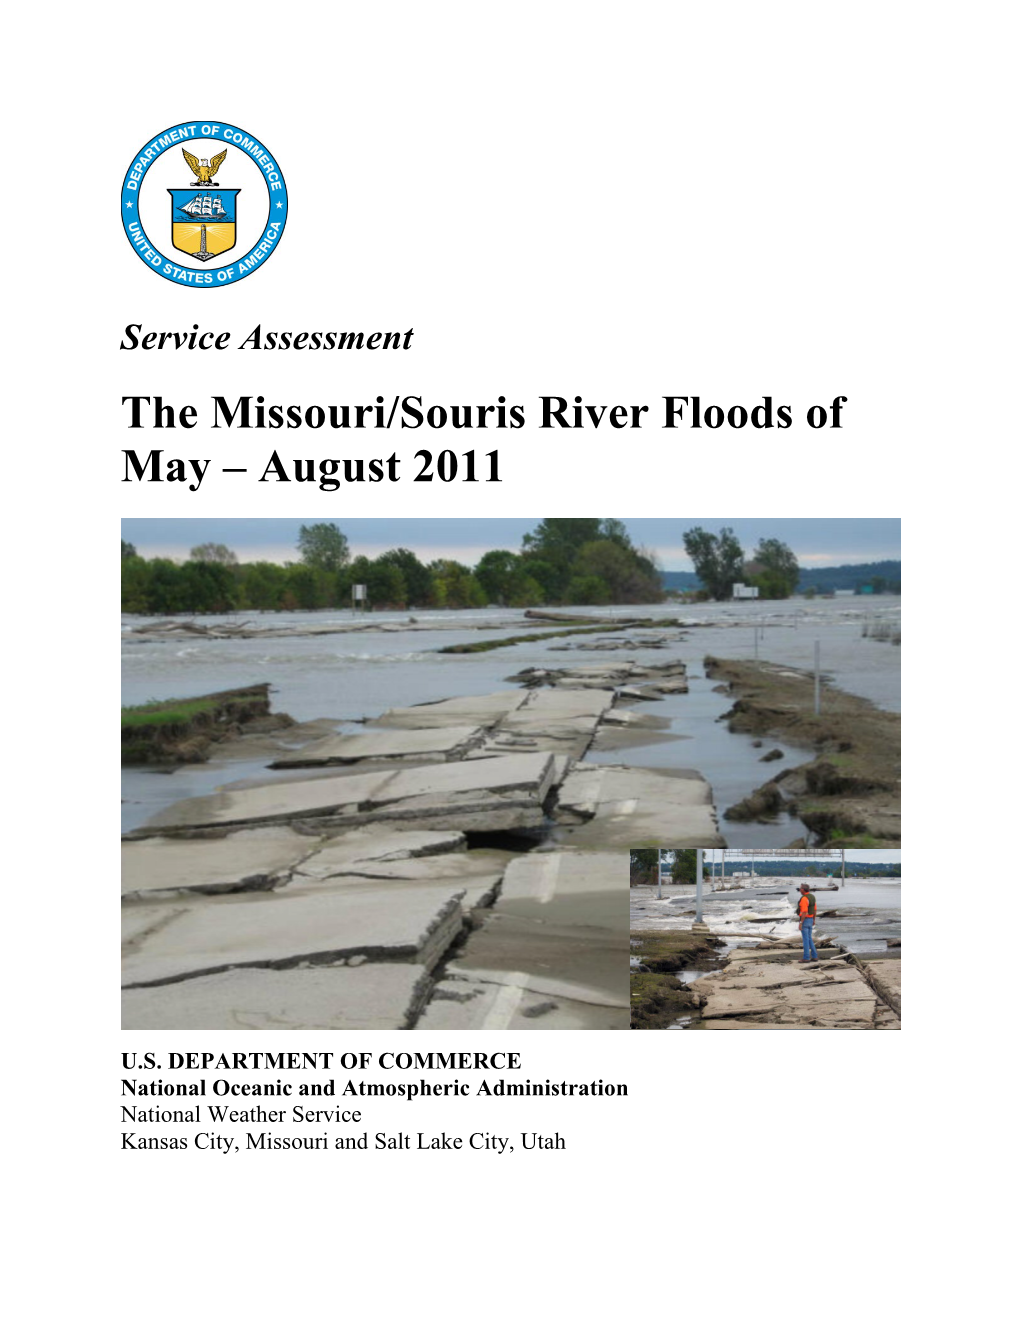 The Missouri/Souris River Floods of May – August 2011